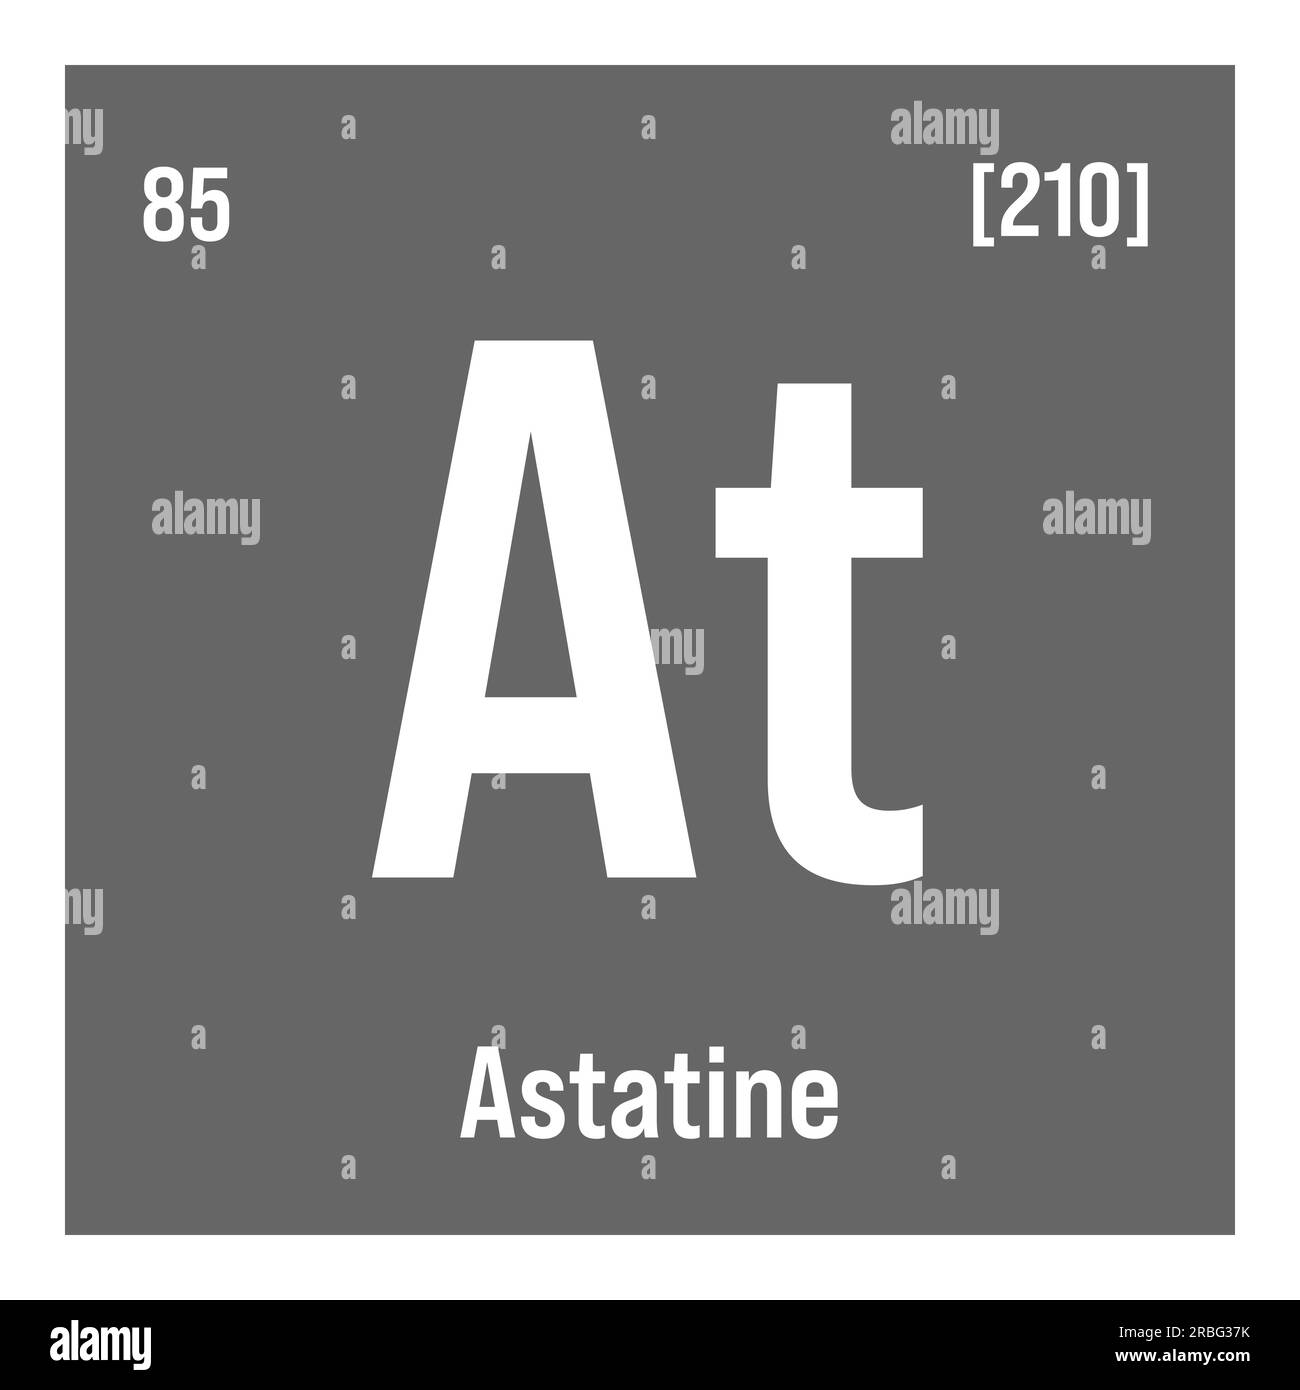 Astatine, At, periodic table element with name, symbol, atomic number and weight. Radioactive halogen with potential uses in cancer treatment and as a source of alpha particles for scientific research. Stock Vector